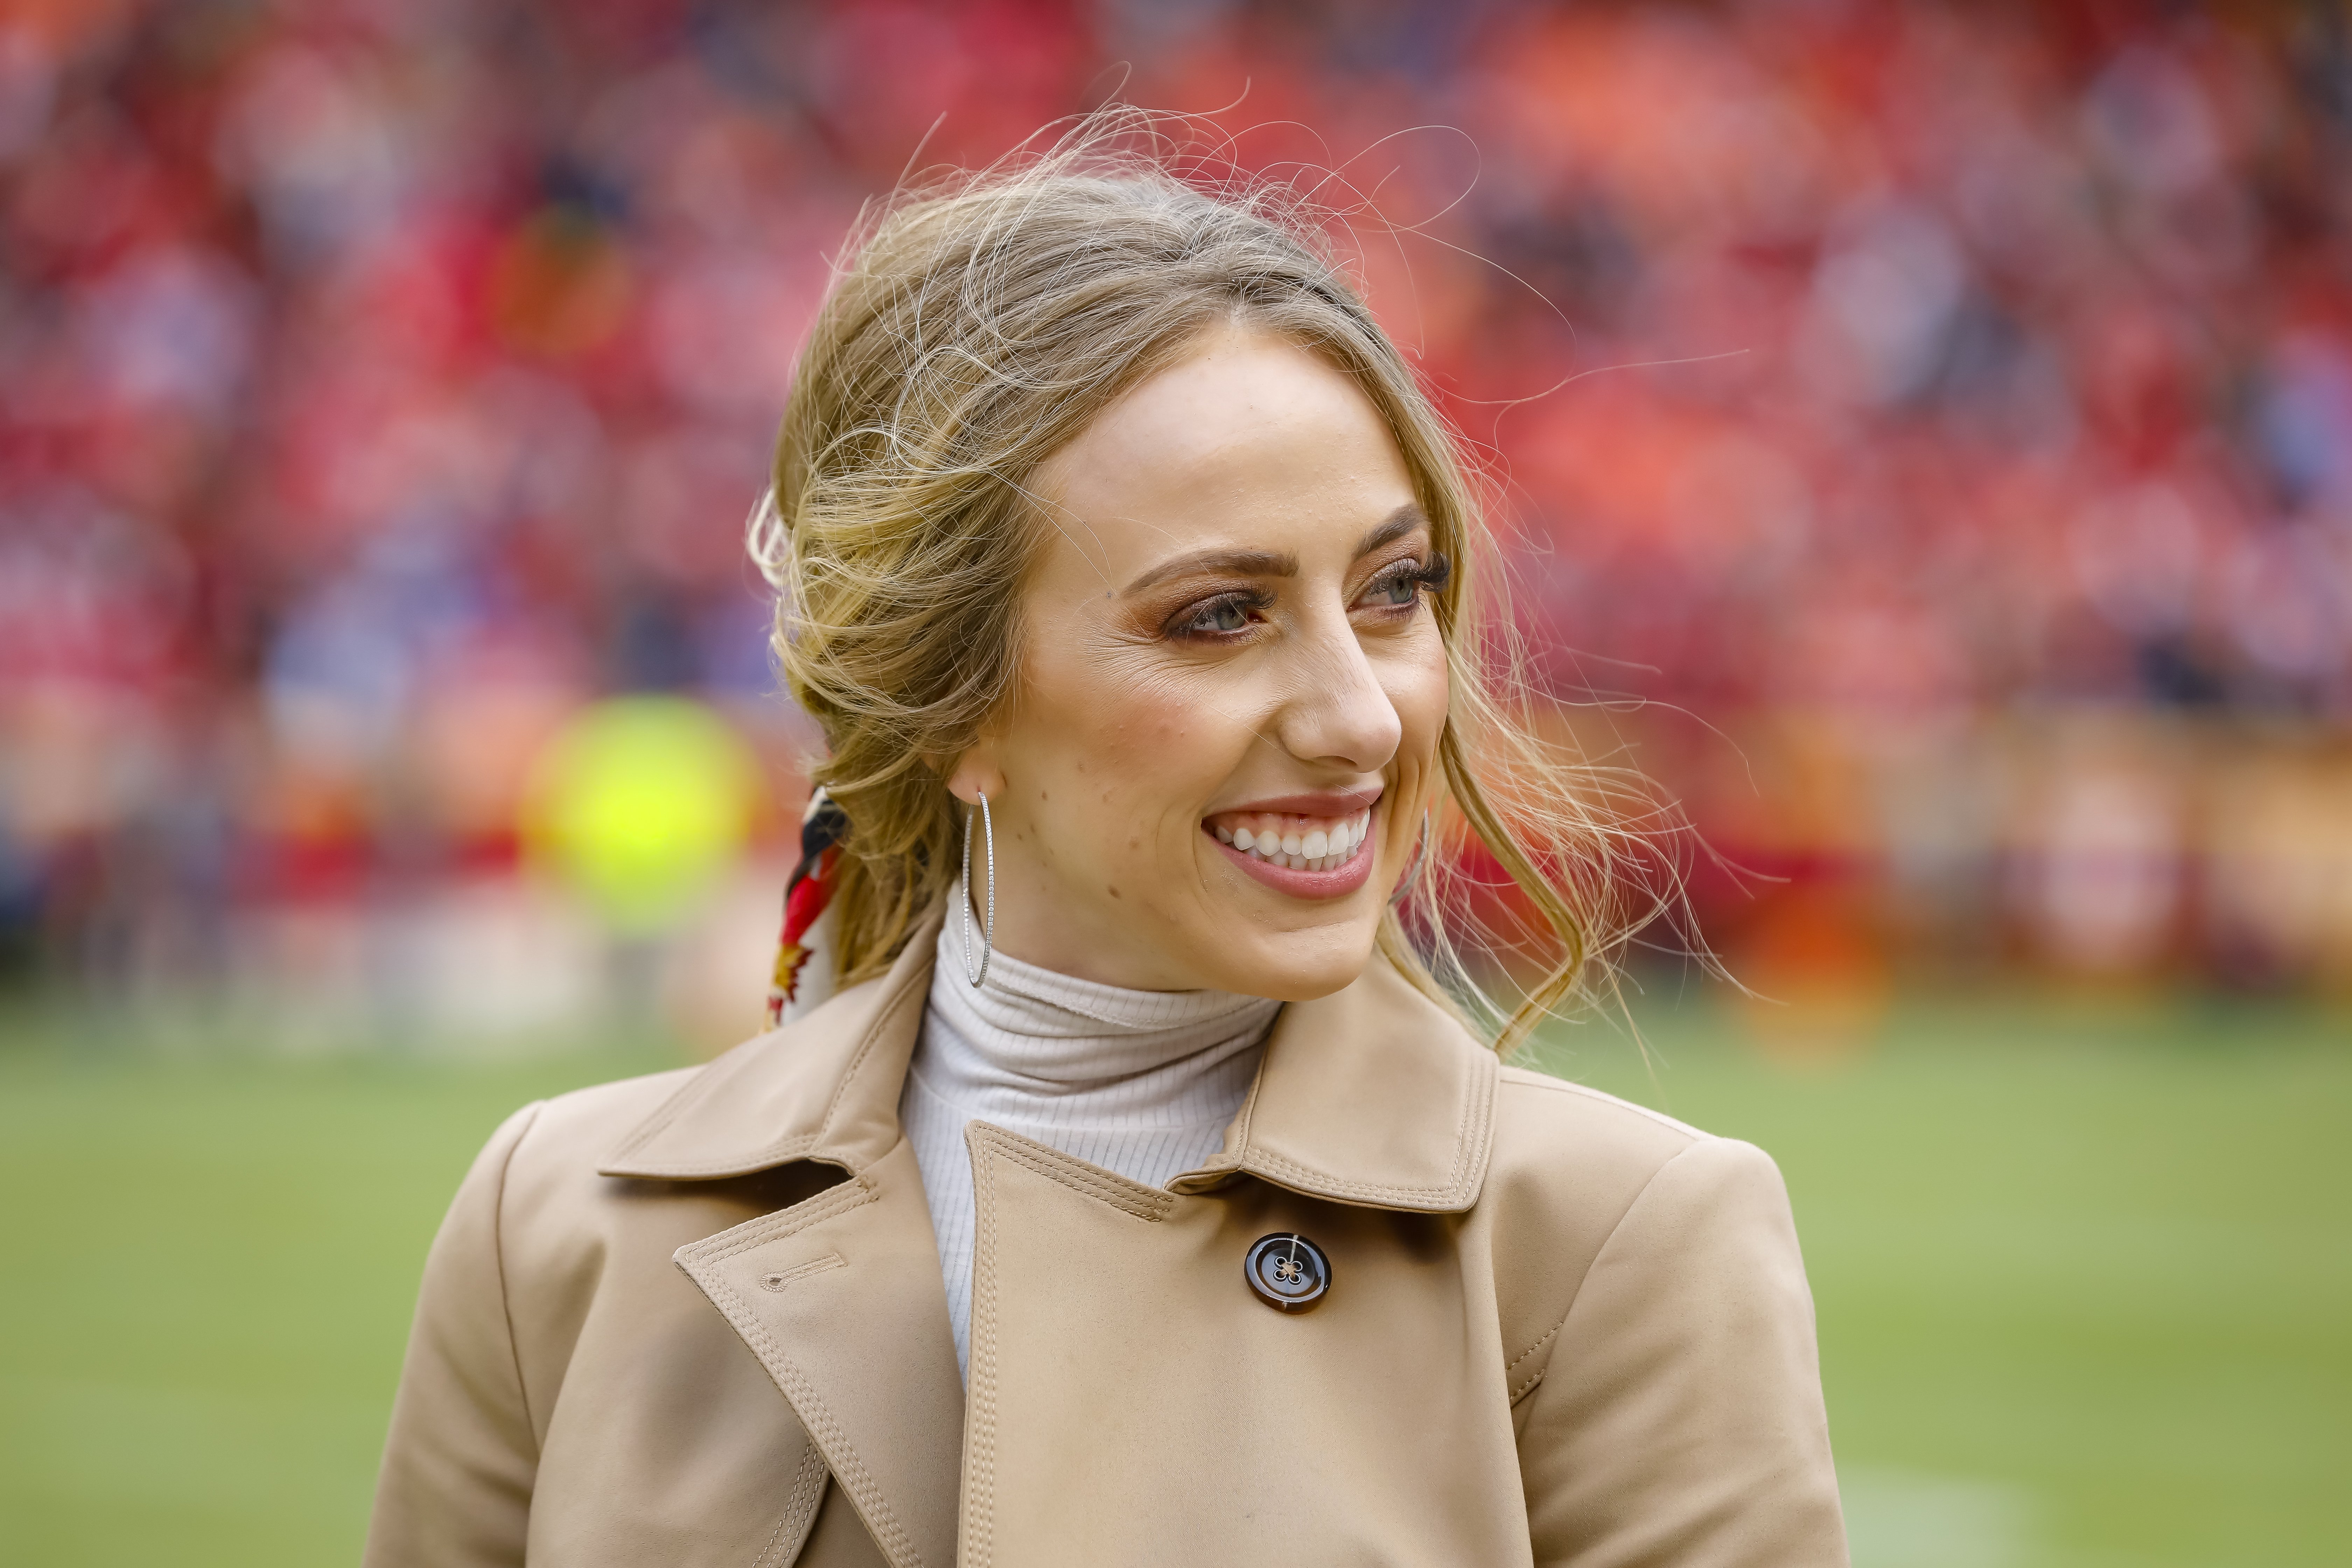 Brittany Matthews pictured before the AFC Divisional Round playoff game between the Kansas City Chiefs and the Houston Texans at Arrowhead Stadium on January 12, 2020 in Kansas City, Missouri | Photo: Getty Images